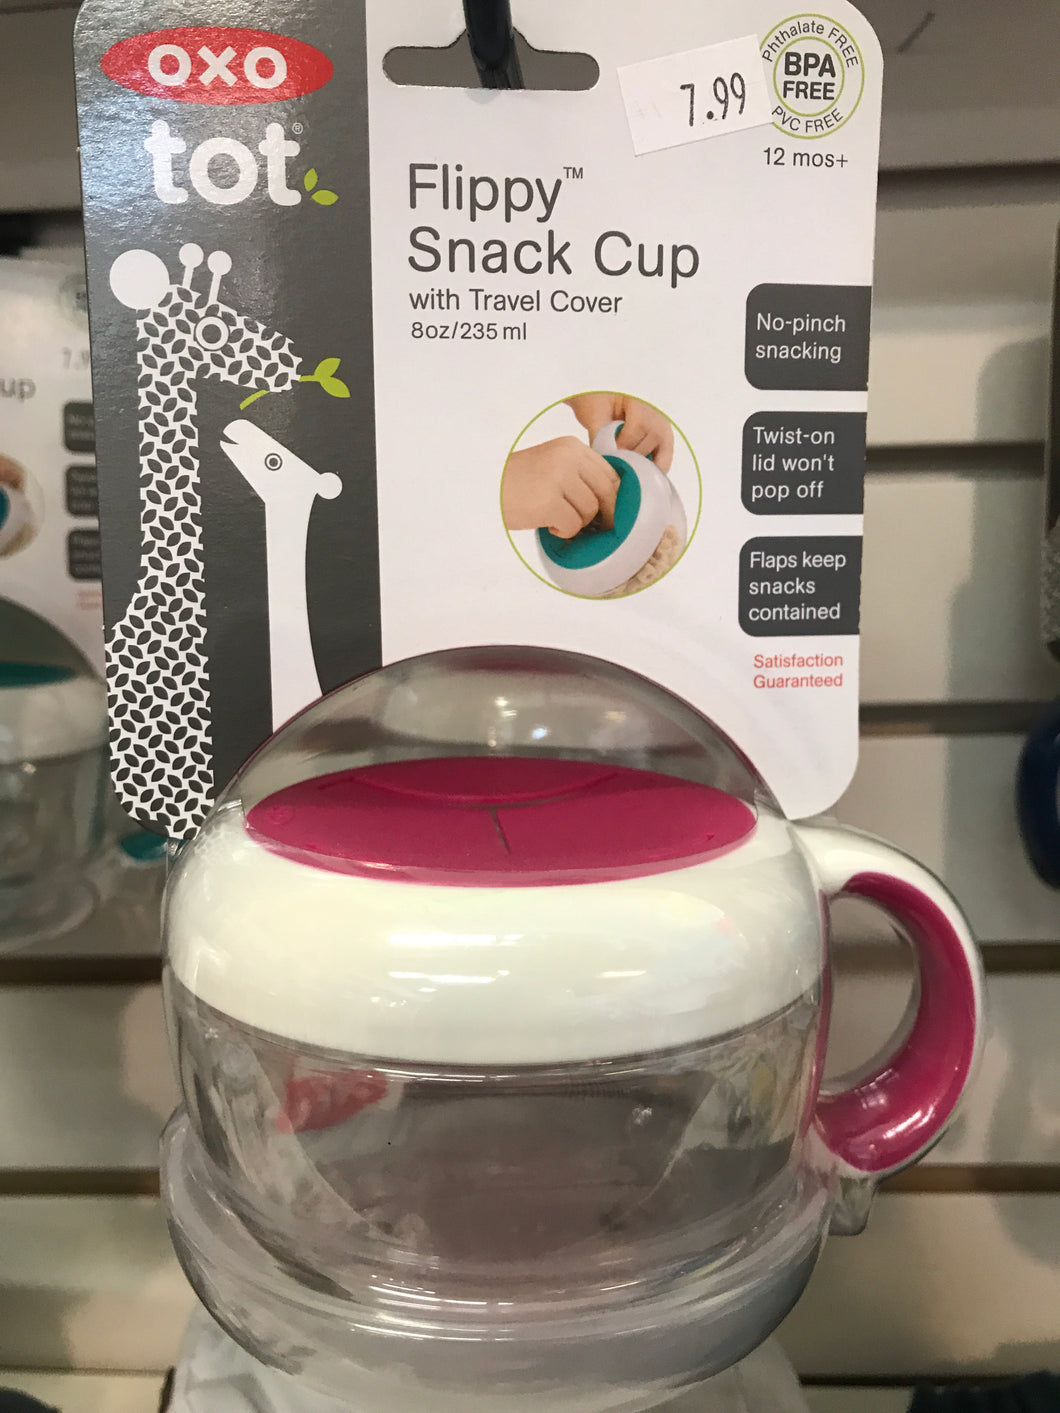 OXO tot - Flippy Snack Cup (pink)